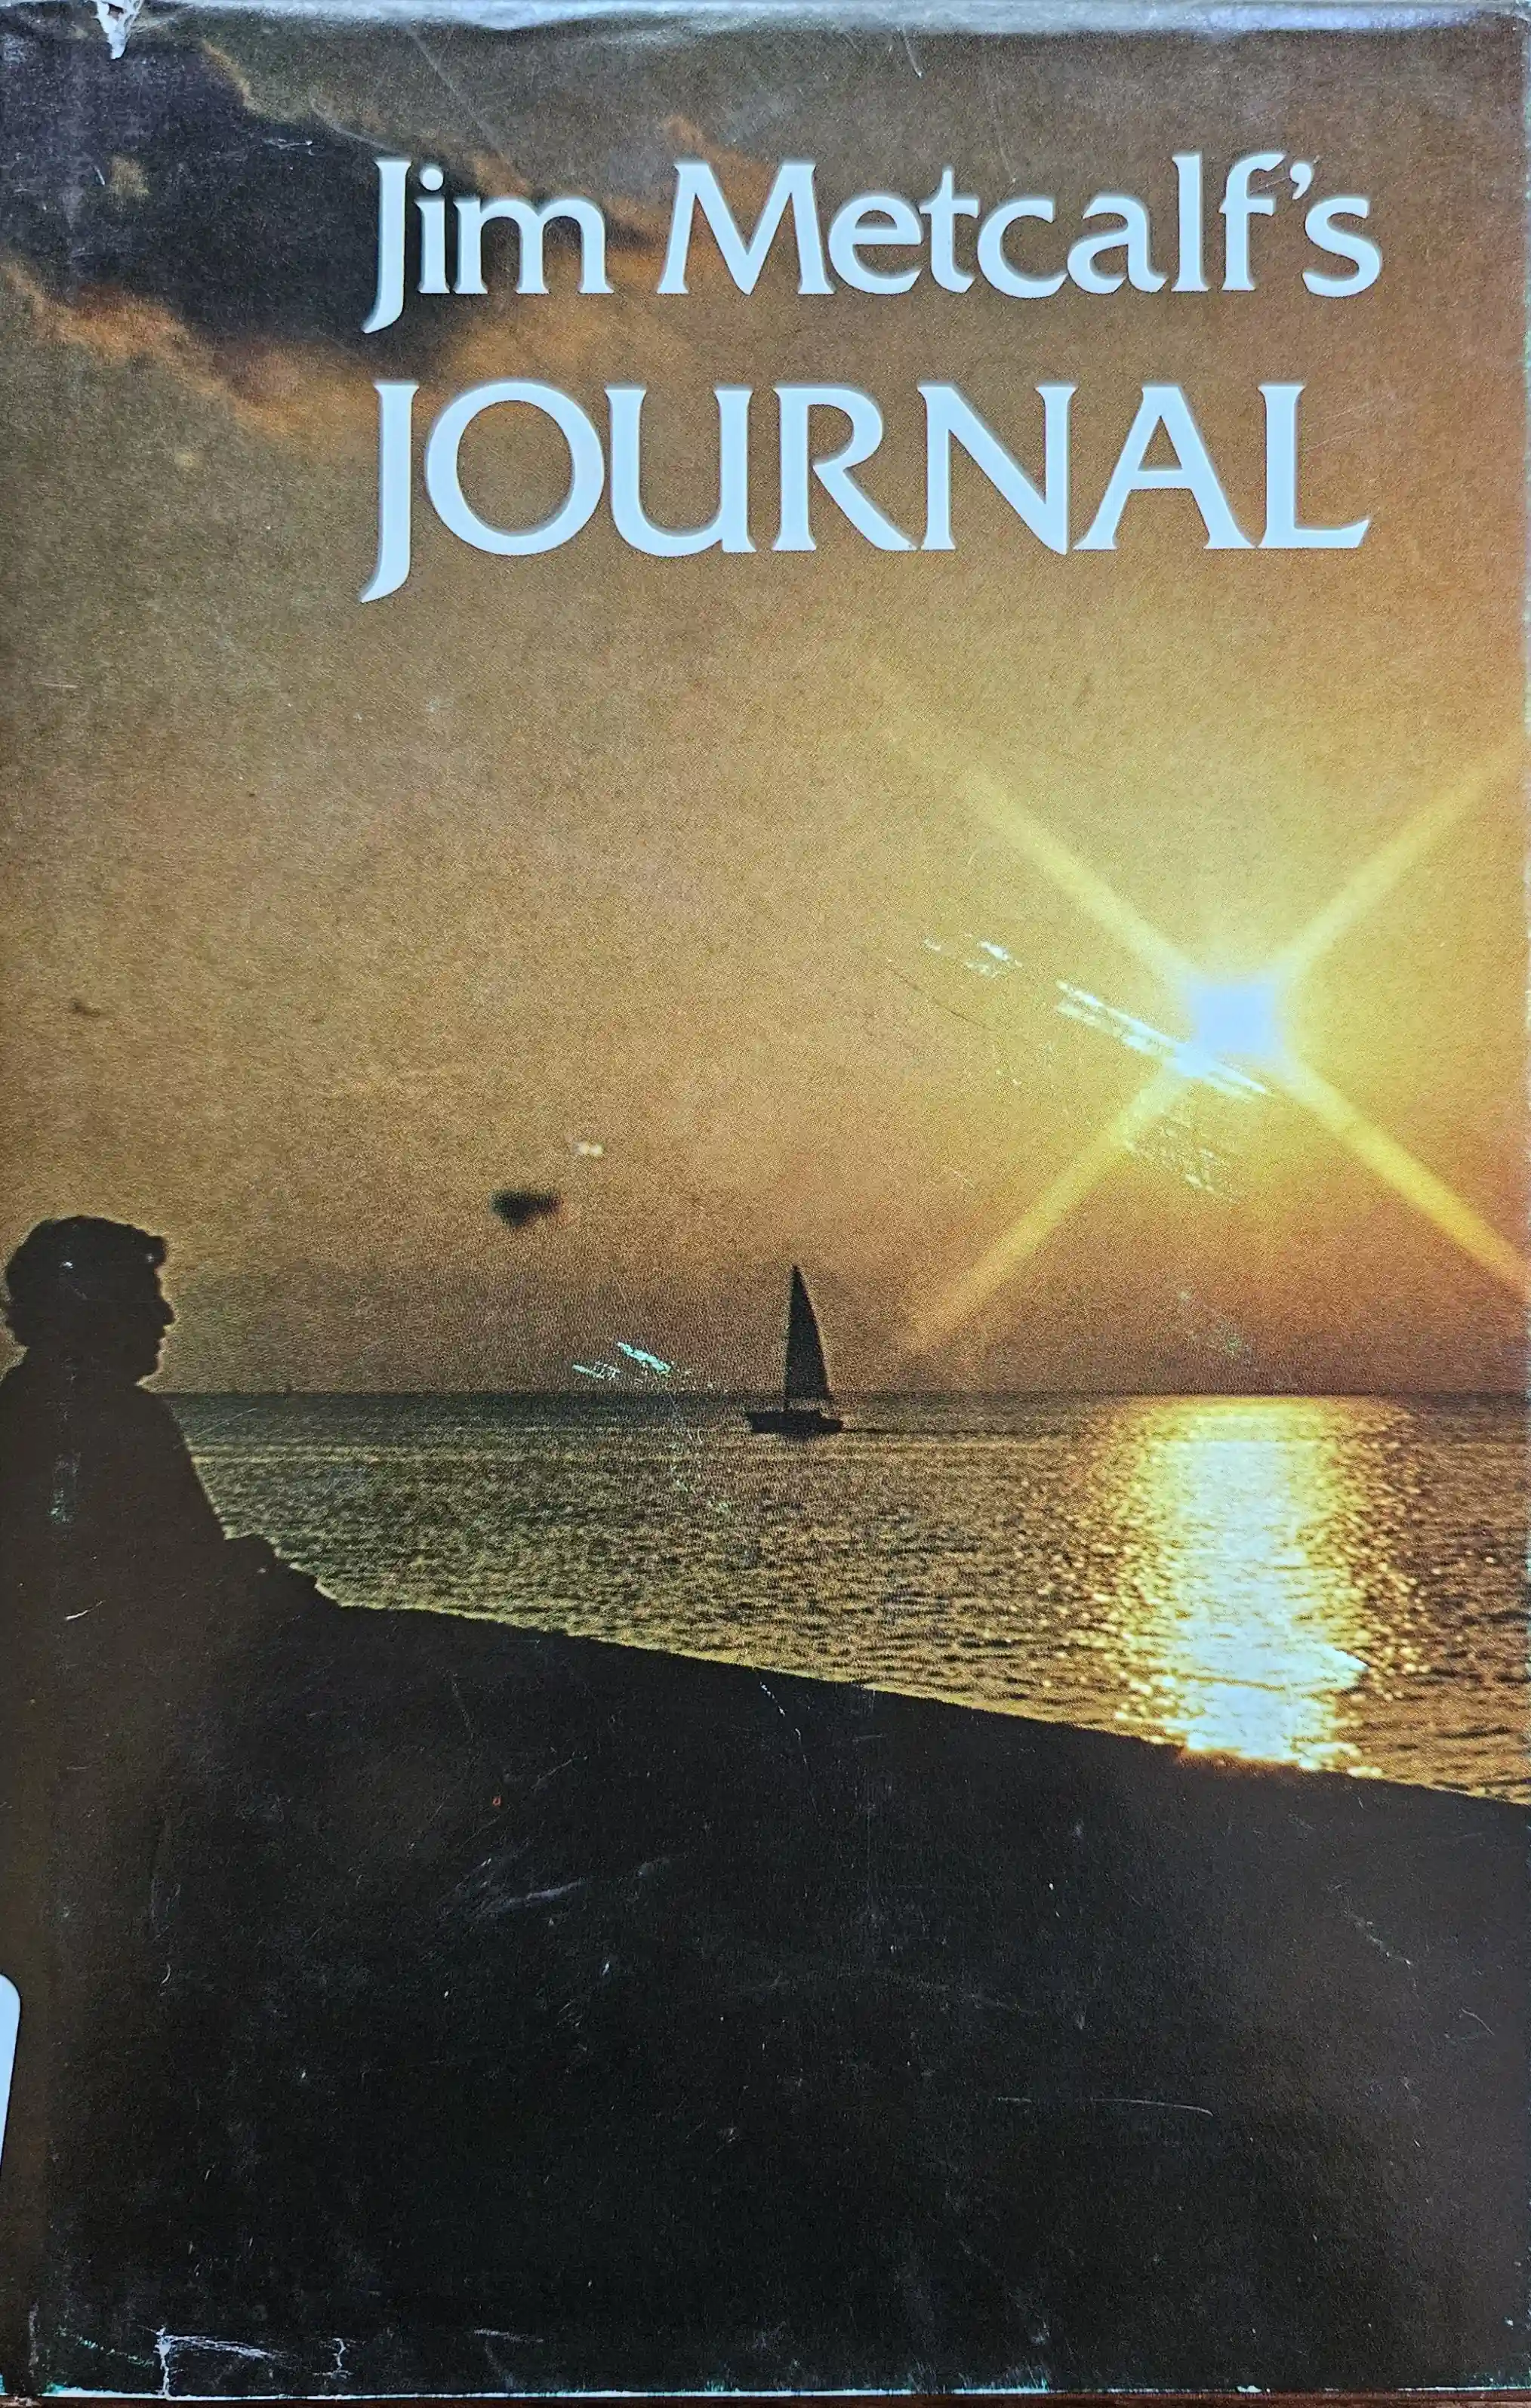 The front jacket cover of Jim's first book, 'Jim Metcalf's Journal' as captured in a close cropped photo. The front cover shows a warmly lit sunset from the south shore of Lake Ponchartrain in New Orleans. The shoreline, along with a lone figure on the shore and a sailboat in the distance, is darkened by the vivid exposure of the sun, leaving only a suggestion of the foreground. The title is featured at the top, in a font with very slight serifs and close kerning. The word 'JOURNAL' is in all-caps.